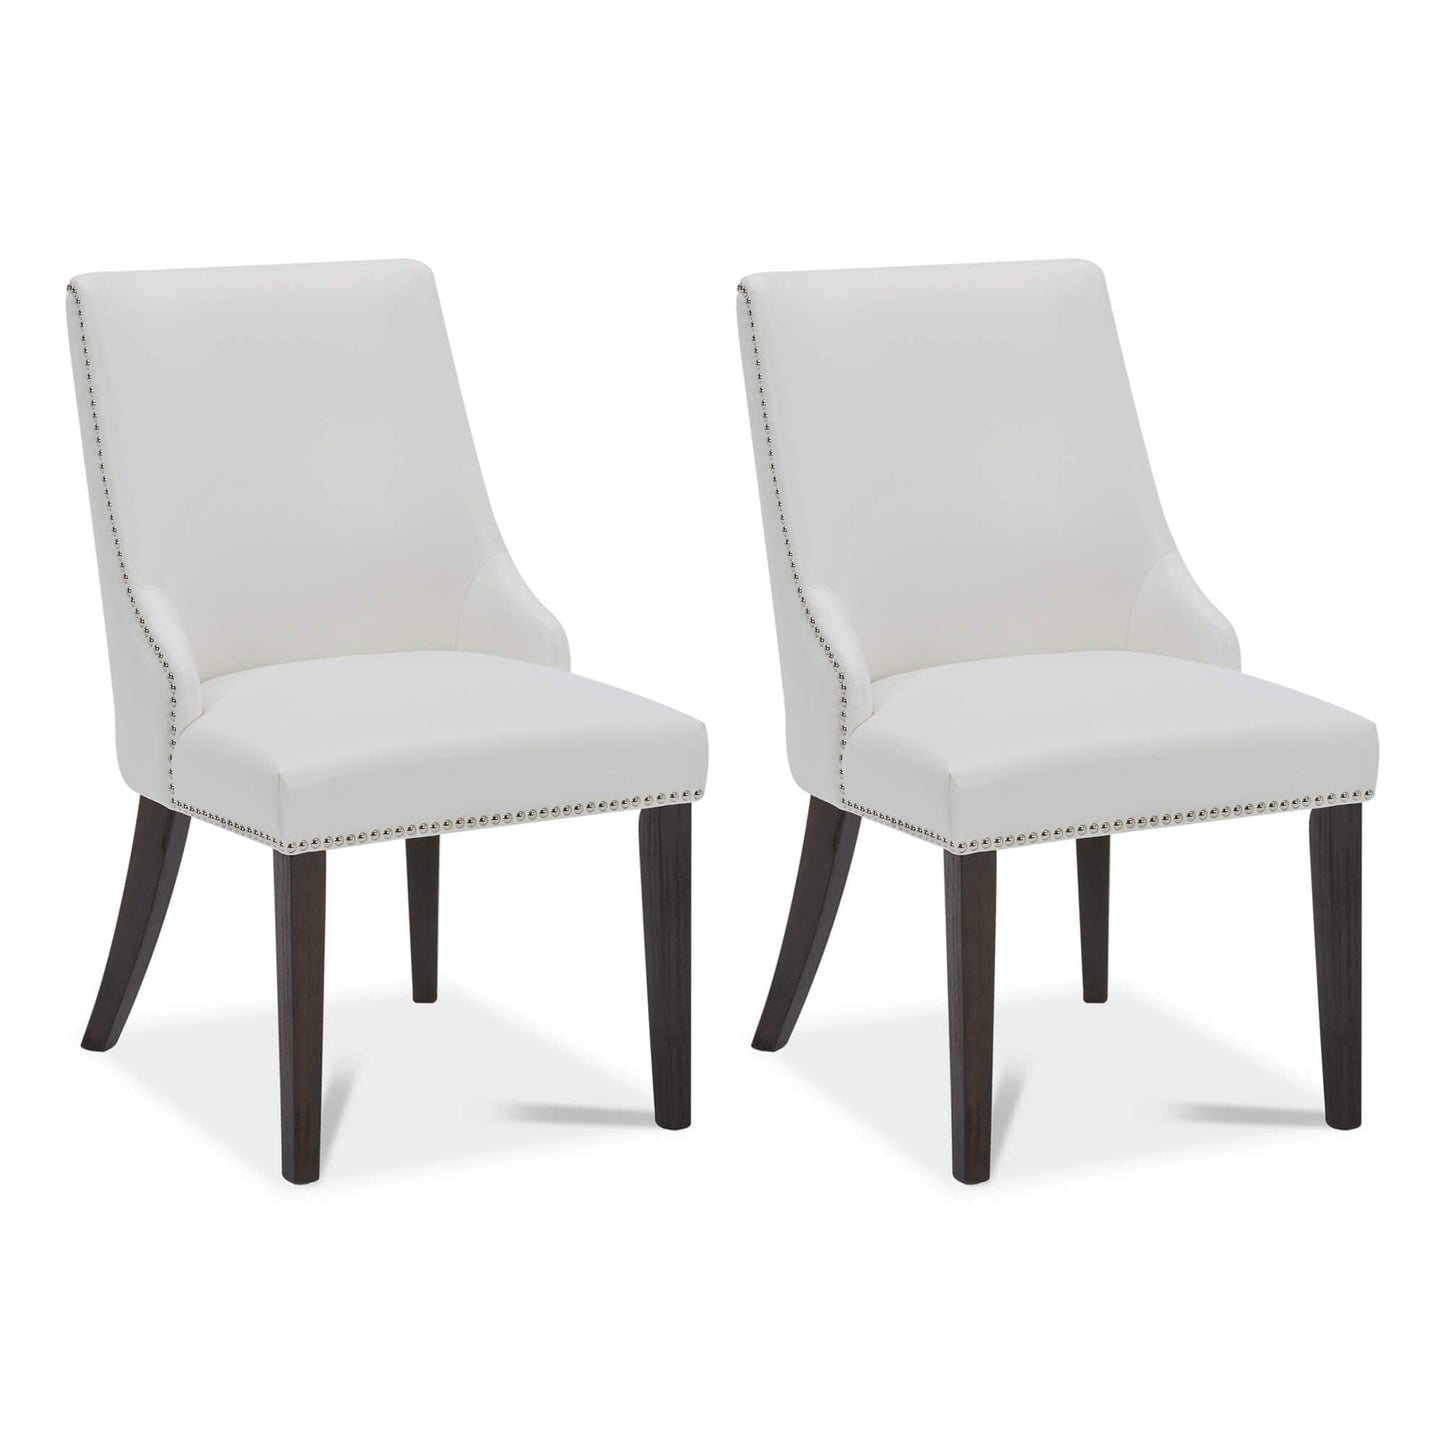 CHITA LIVING-Asher Upholstered Dining Chair with Nailhead Trim (Set of 2)-Dining Chairs-Faux Leather-White-